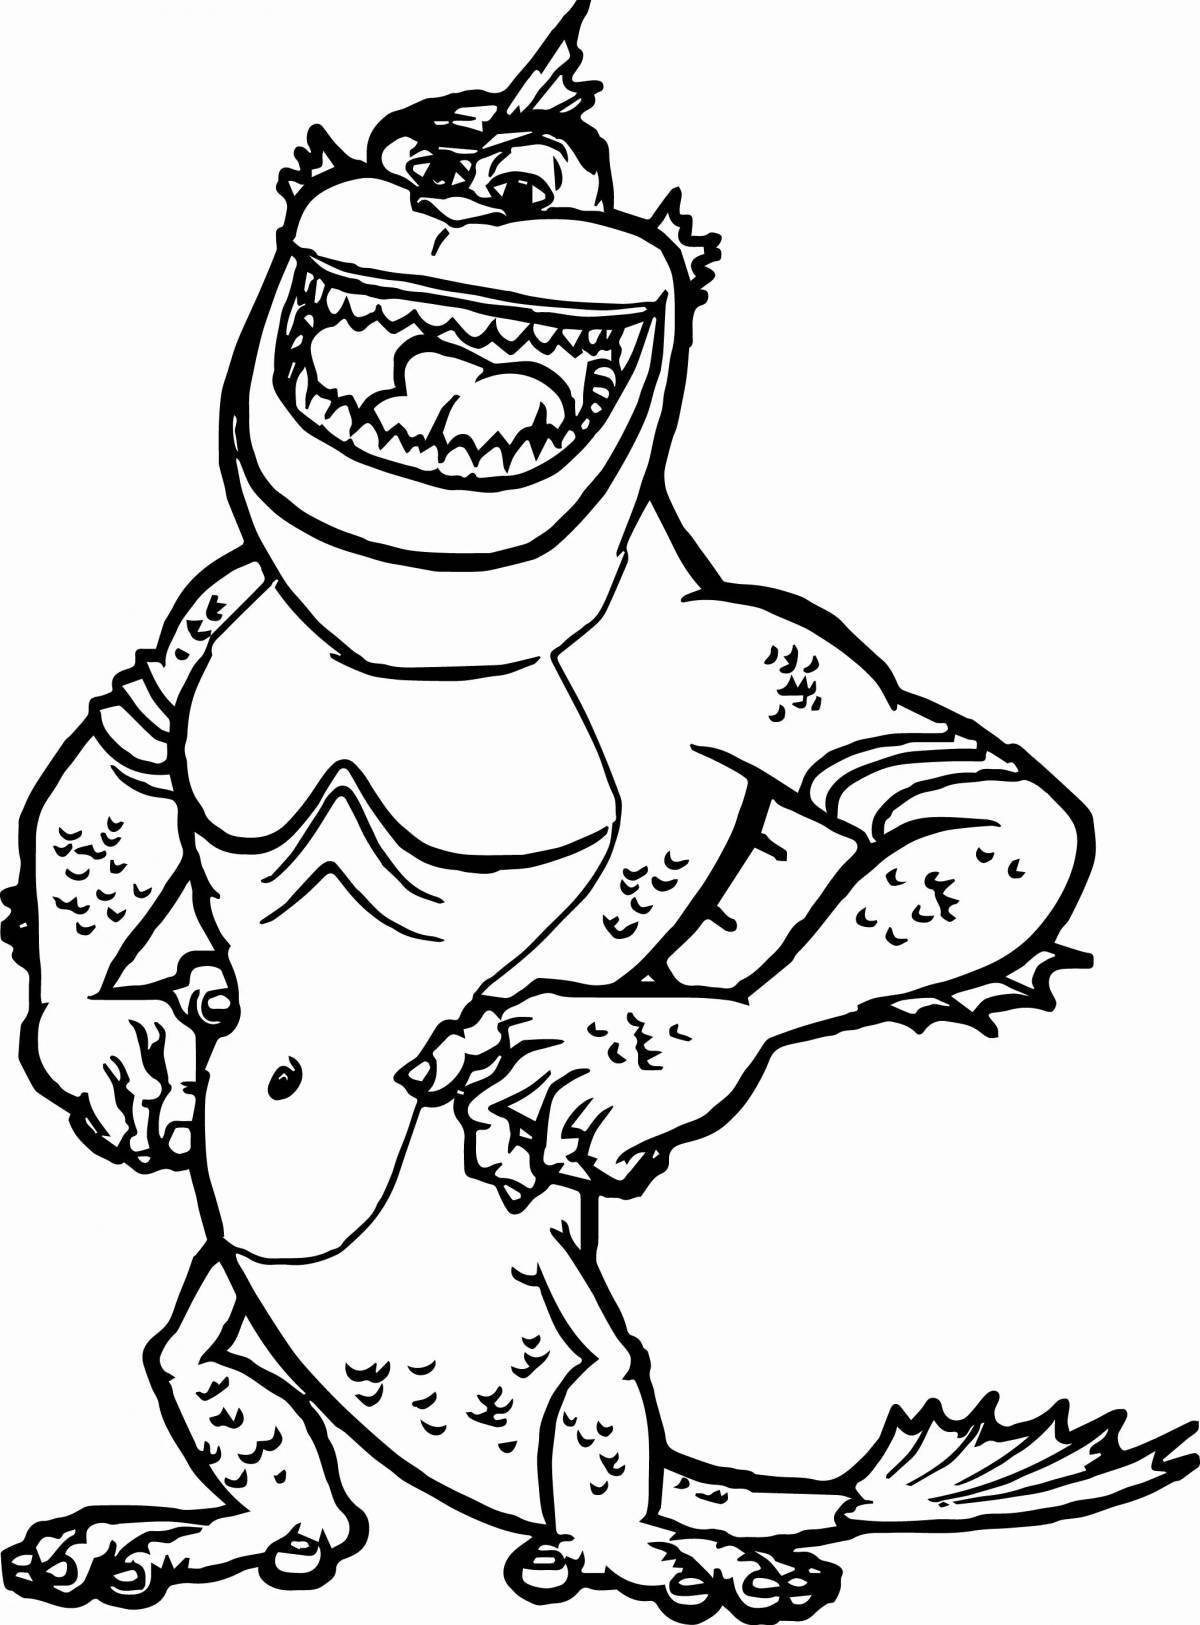 Coloring page of a joyful one-eyed monster